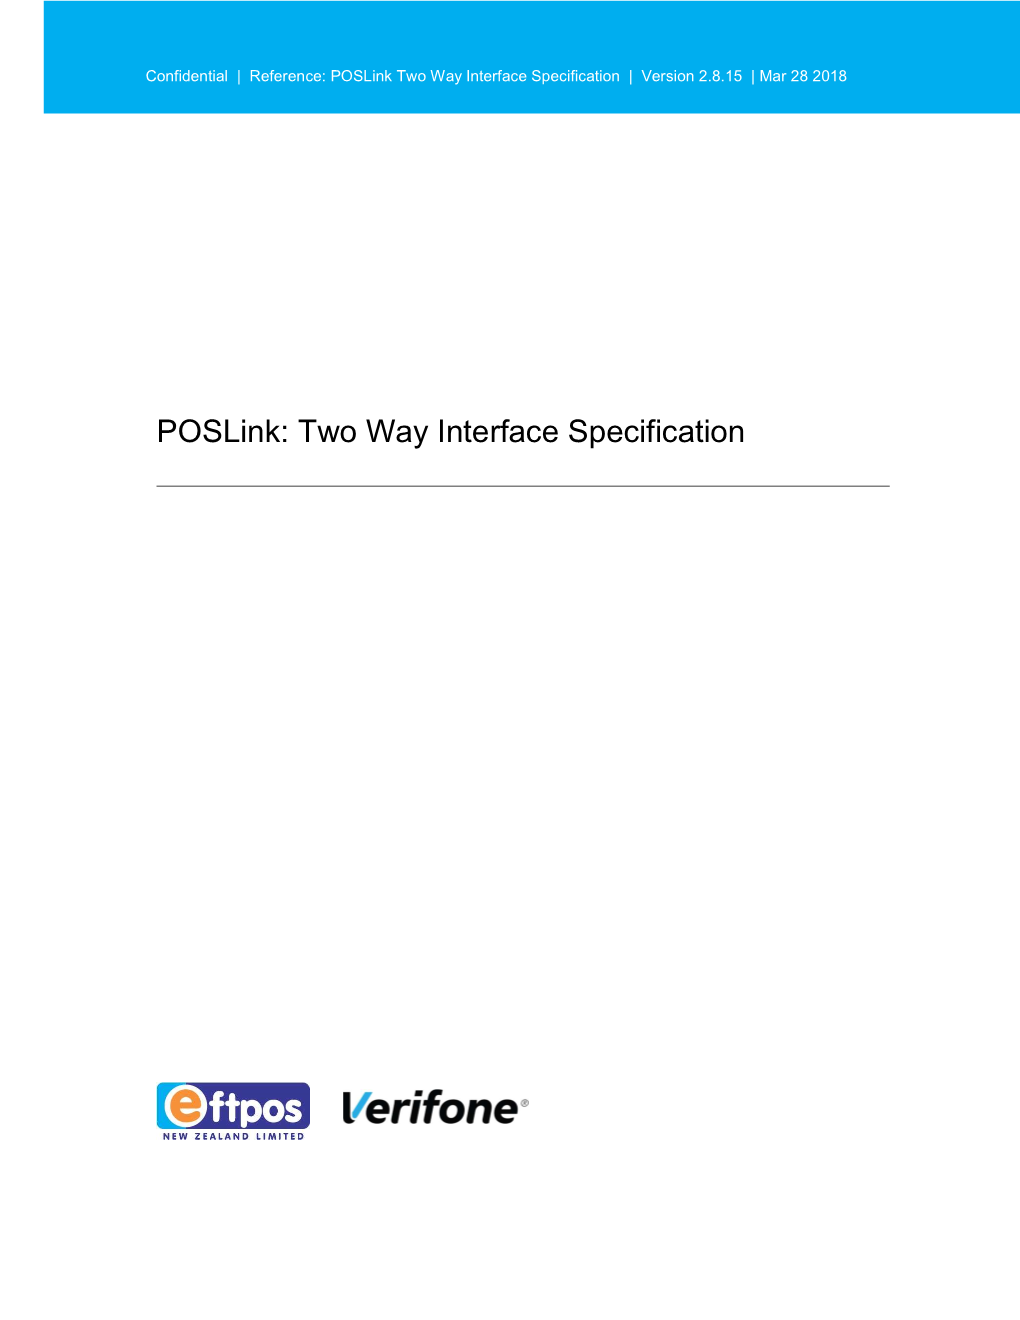 Poslink: Two Way Interface Specification